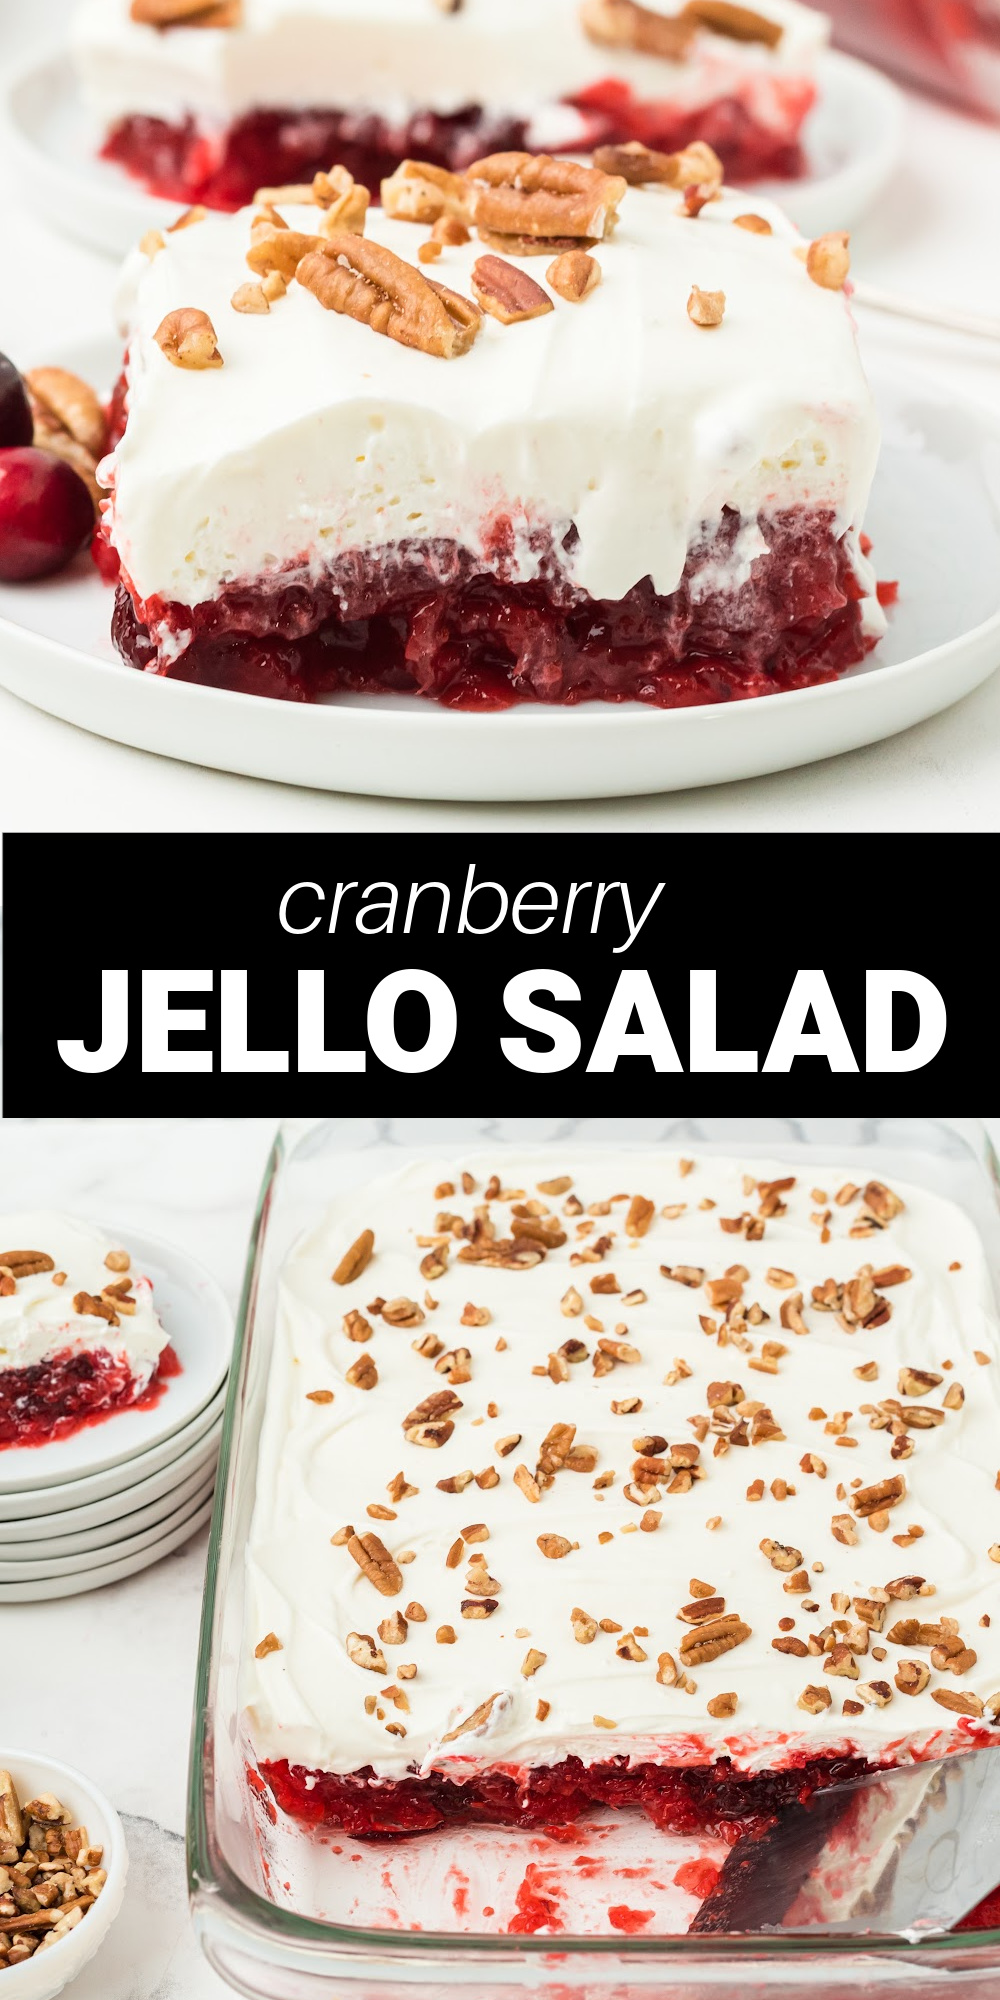 This Cranberry Jello Salad has a wonderful sweet and tart combination of flavors. It's a super easy recipe that uses raspberry gelatin, whole cranberry sauce, pineapple, and pecans. It's a beautiful and festive side dish perfect for your Christmas dinner or holiday meal.